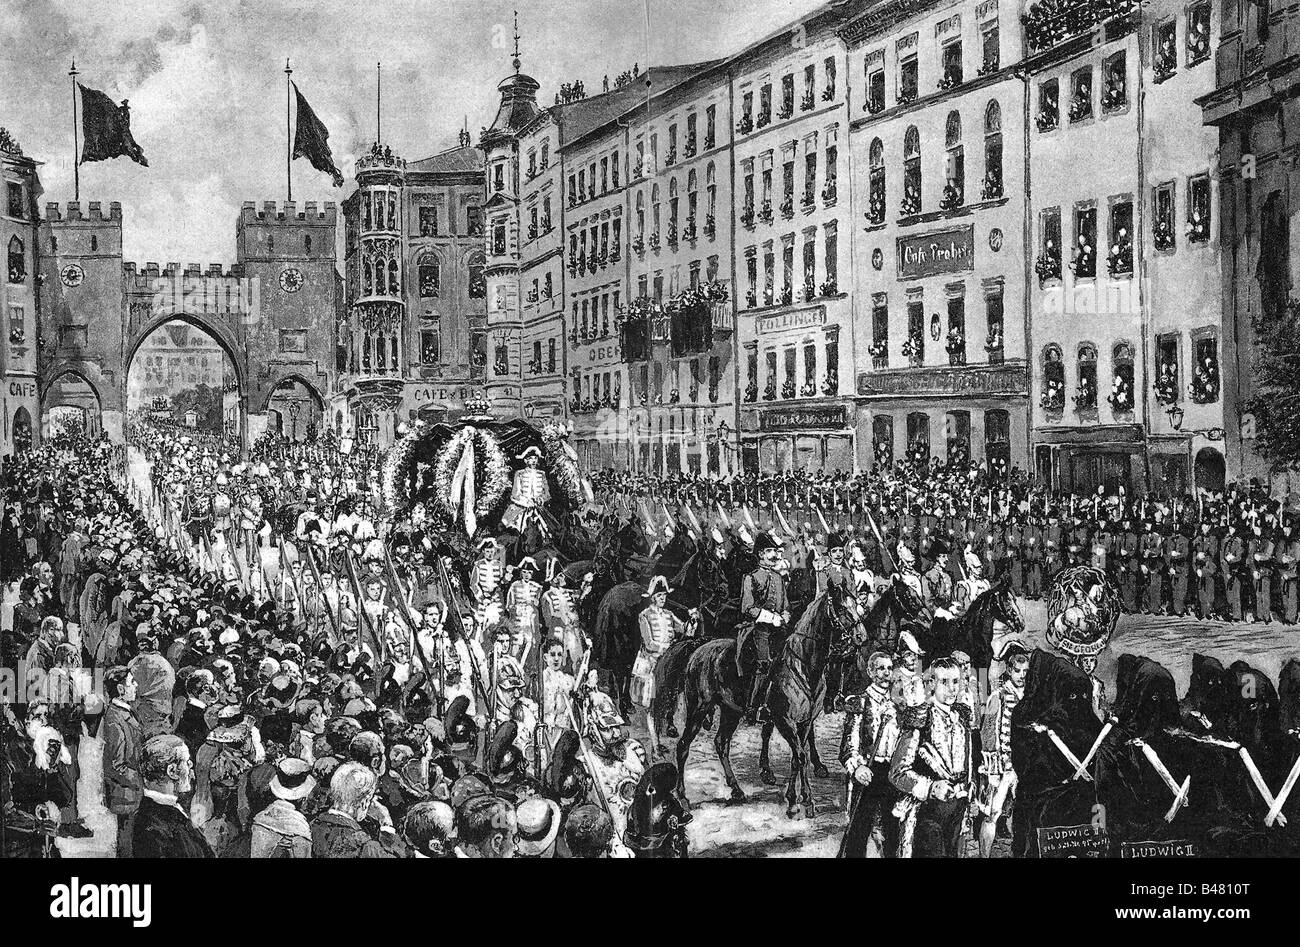 Ludwig II, 25.8.1845 - 13.6.1886, King of Bavaria 10.3.1864 - 13.6.1886, death, funeral cortege, Neuhauser Strasse, Munich, zincography by Angerer and Göschl, Vienna, after drawing by Fritz Bergen, , Stock Photo